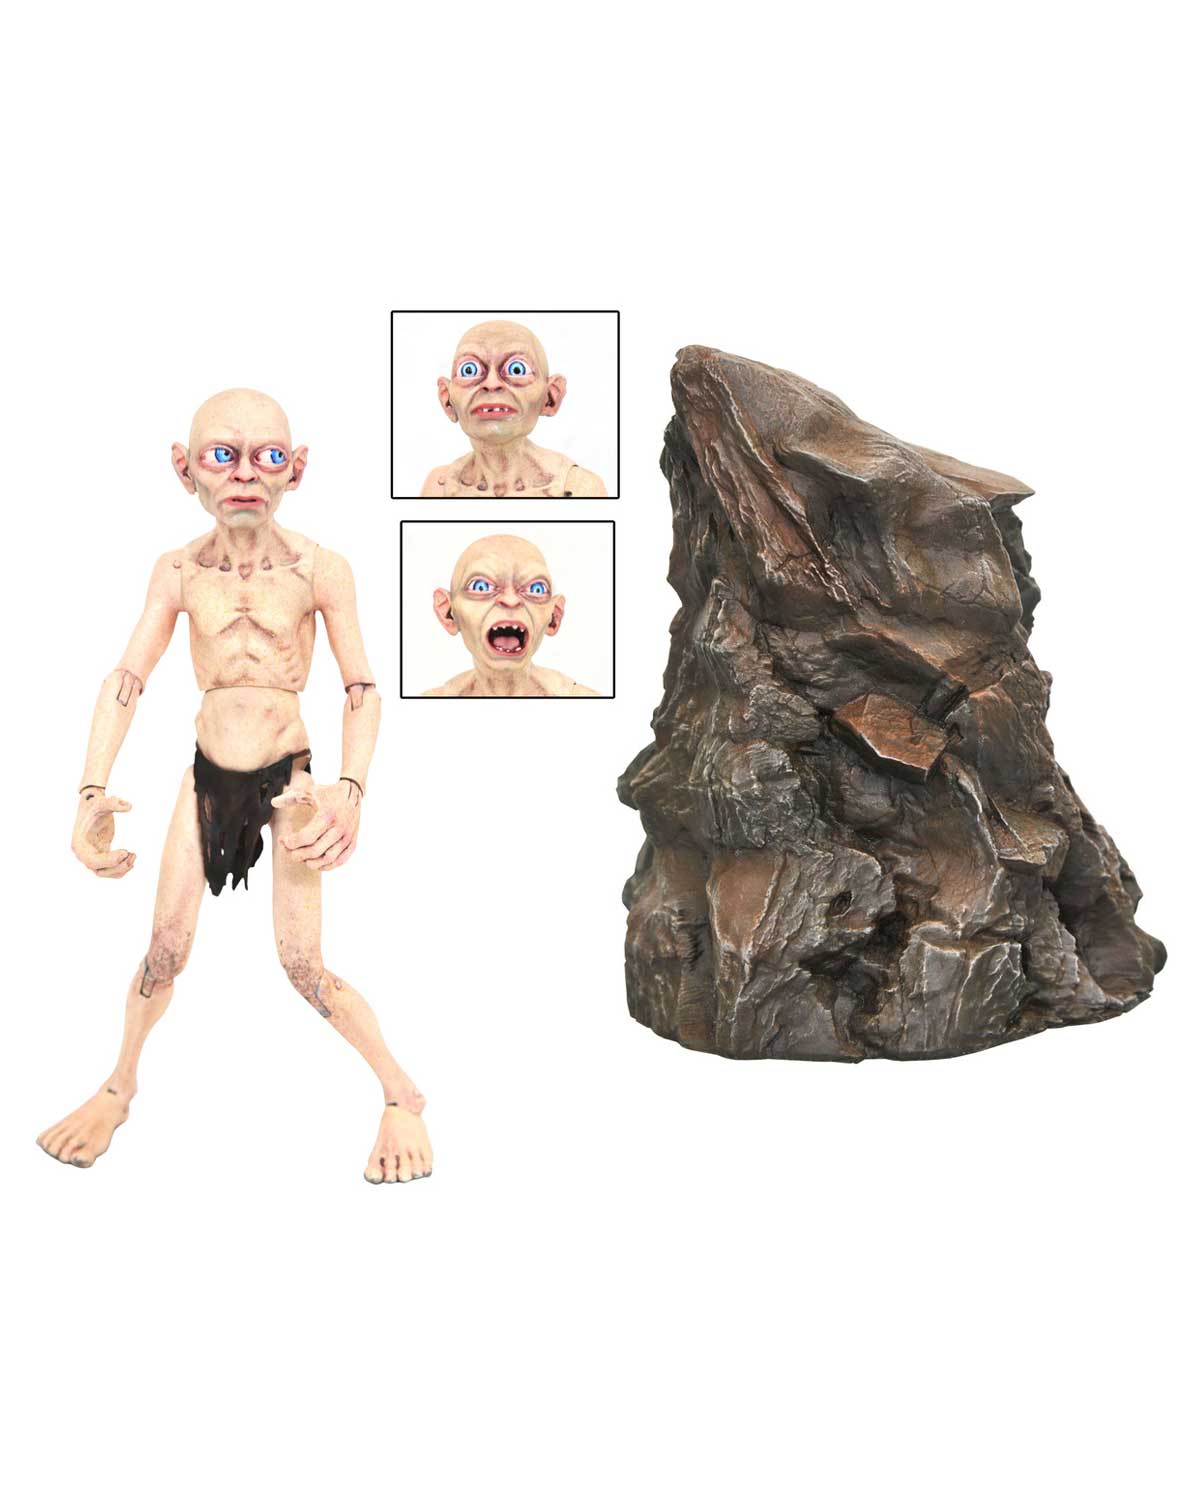 Action Figure The Lord of the Rings - Gollum Deluxe 